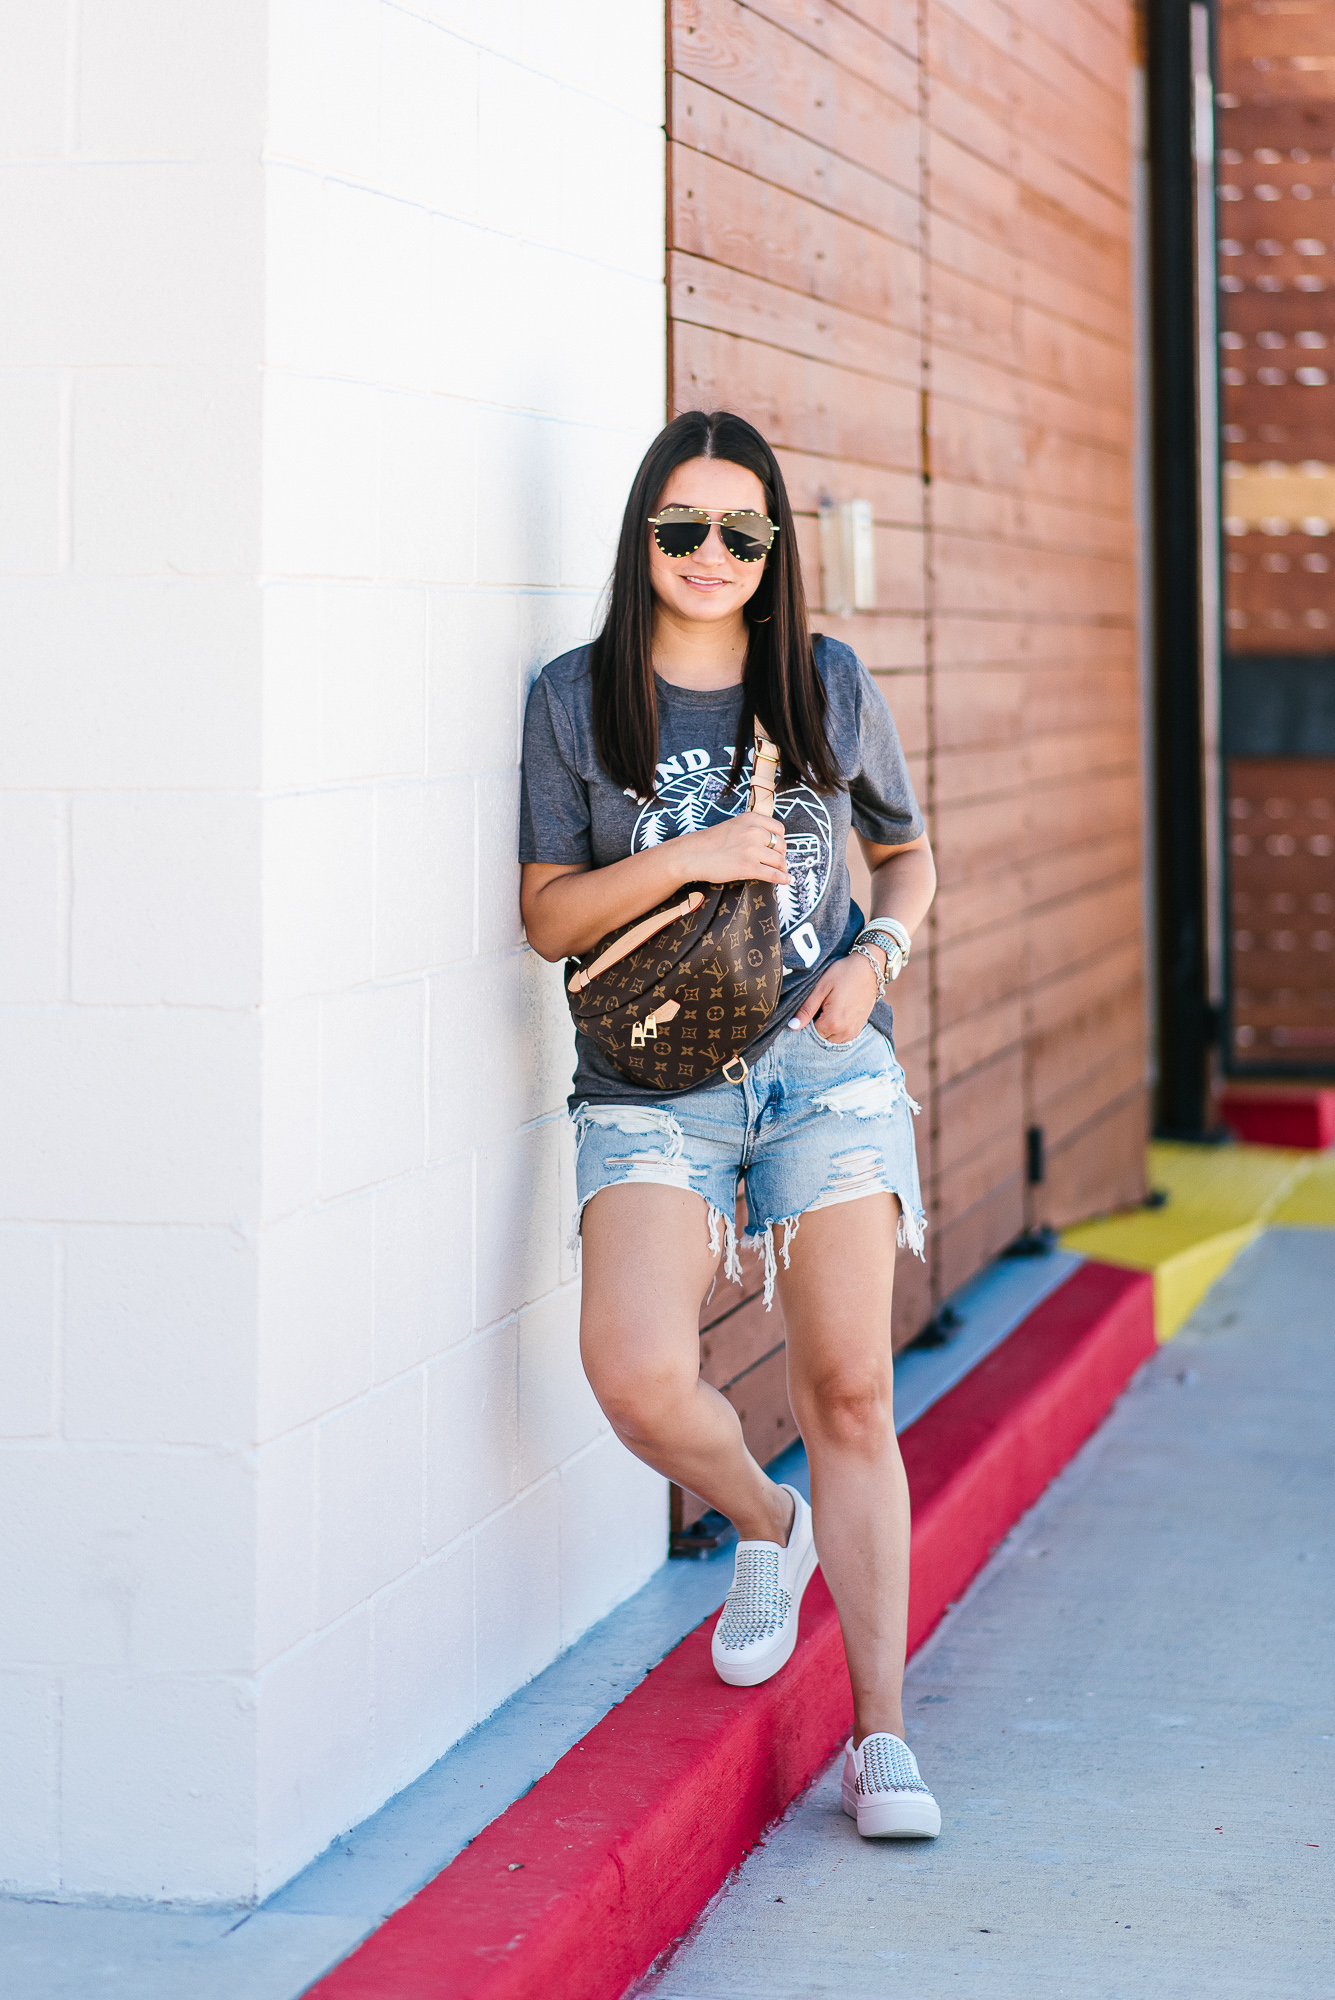 Graphic Tees You'll Love | LuxMommy | Houston Fashion, Beauty and ...